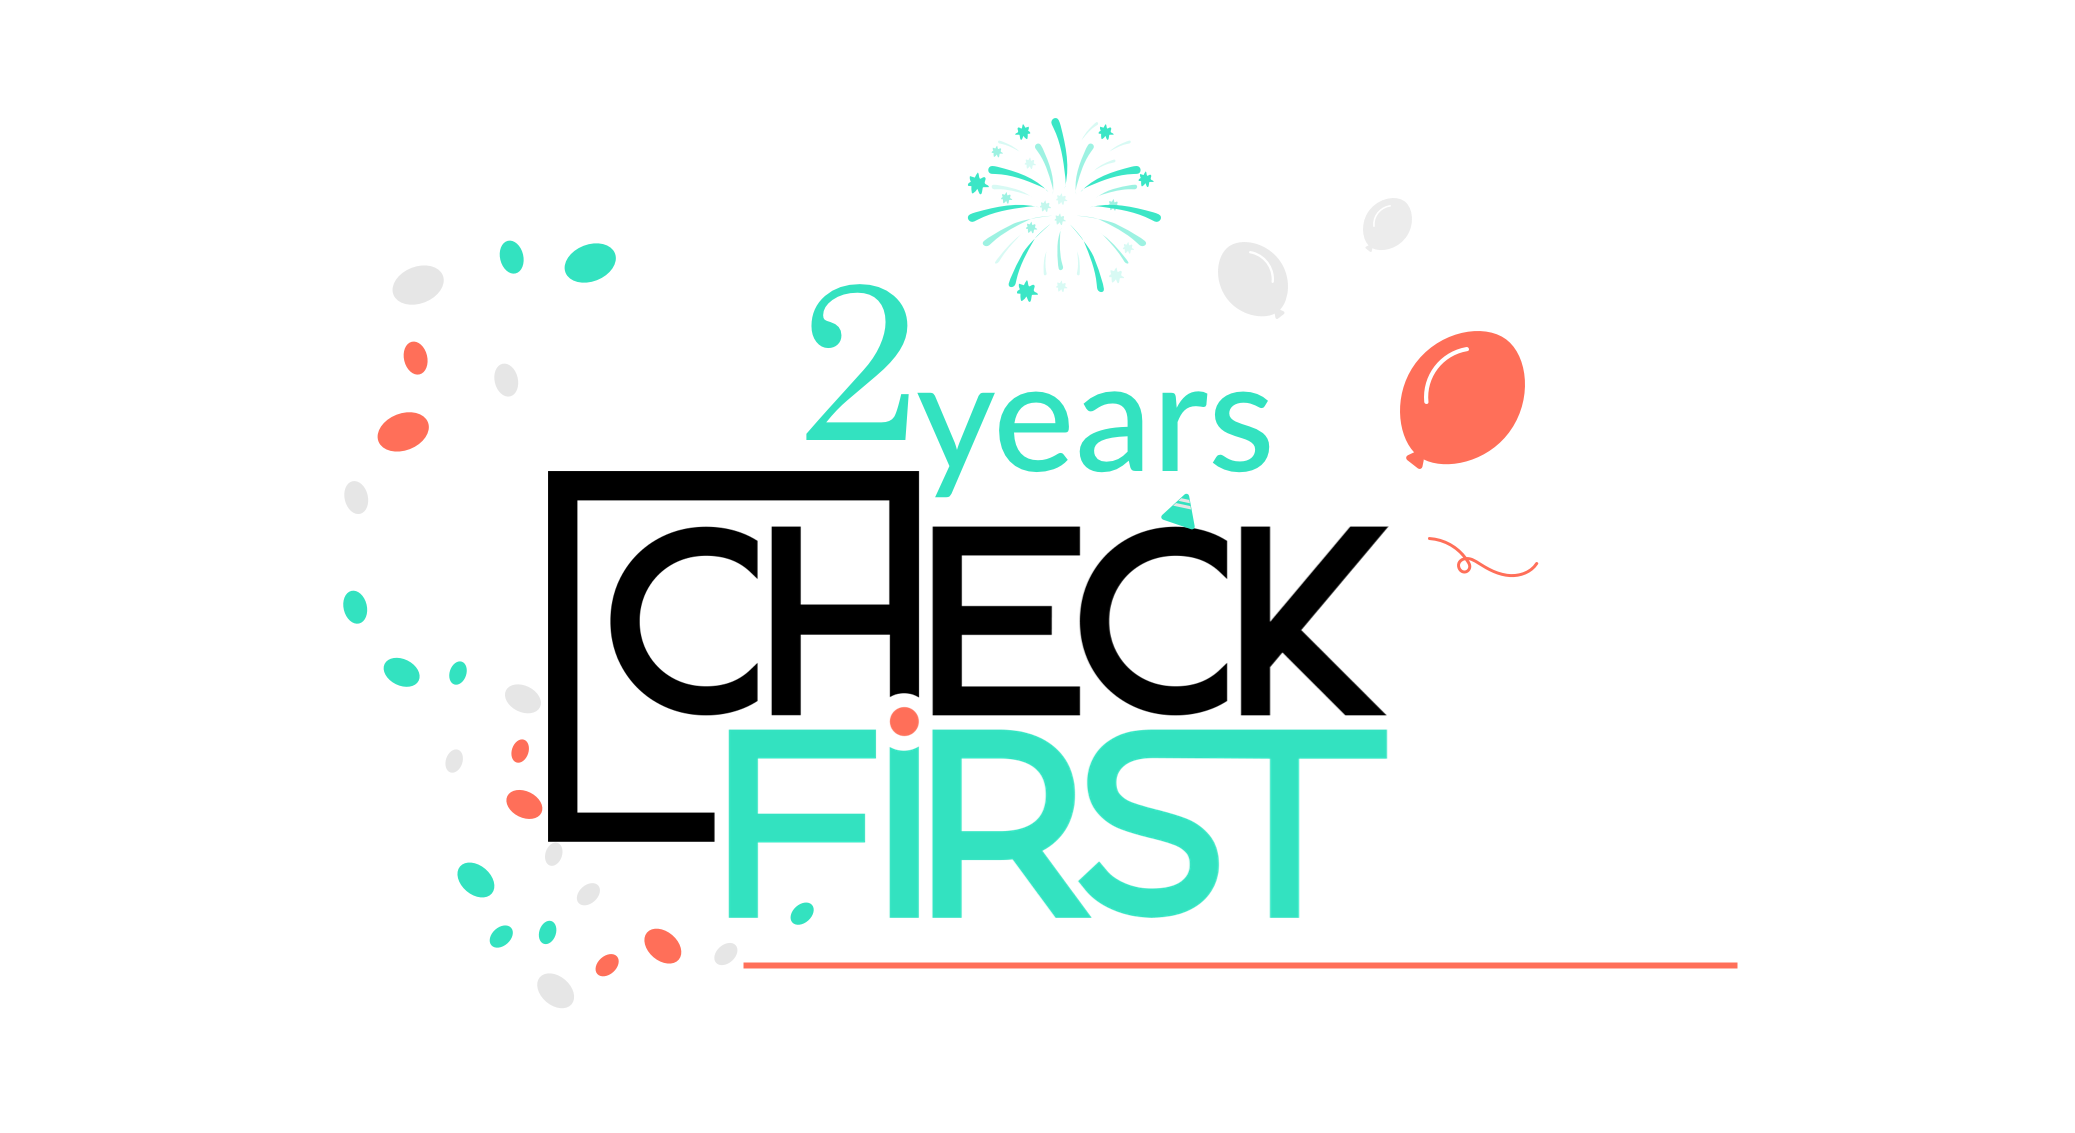 2 years of CheckFirst